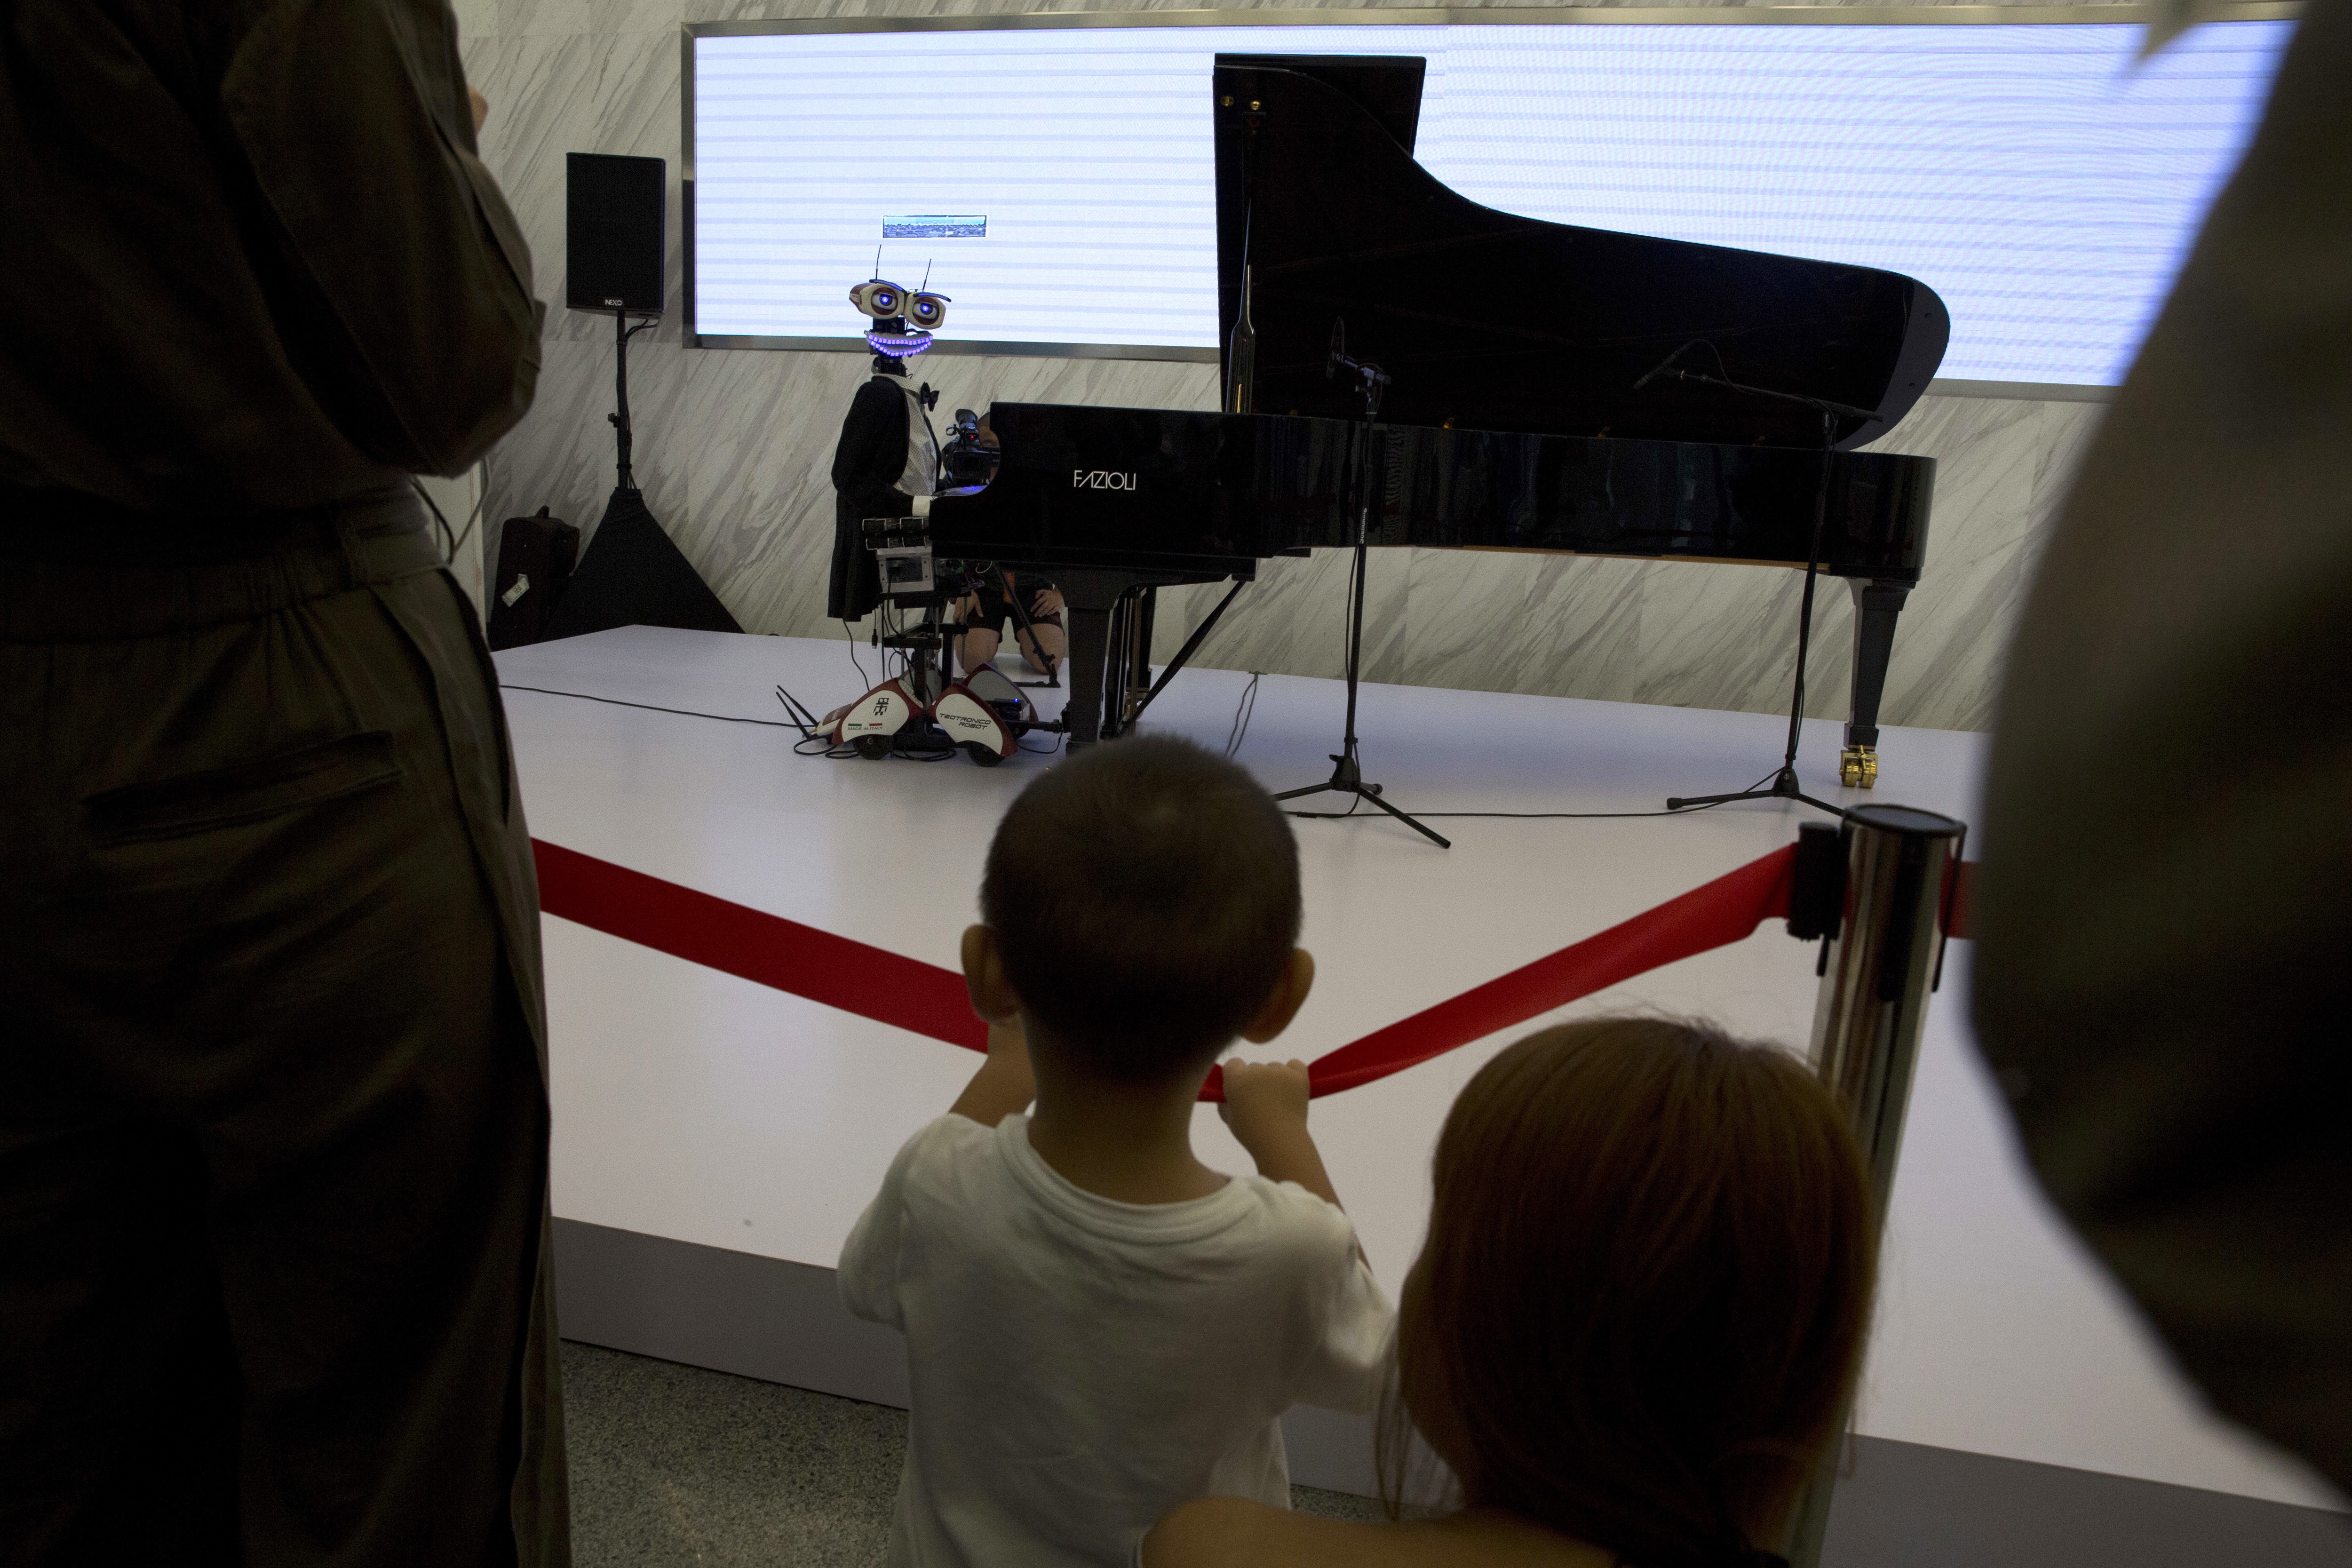 A child looks at a piano playing robot a day before the opening of the World Robot Conference held in Beijing, China, Tuesday, Aug. 22, 2017. The annual conference is a showcase of China's burgeoning robot industry ranging from companion robots to those deployed on manufacturing assembly line and entertainment. (AP Photo/Ng Han Guan)